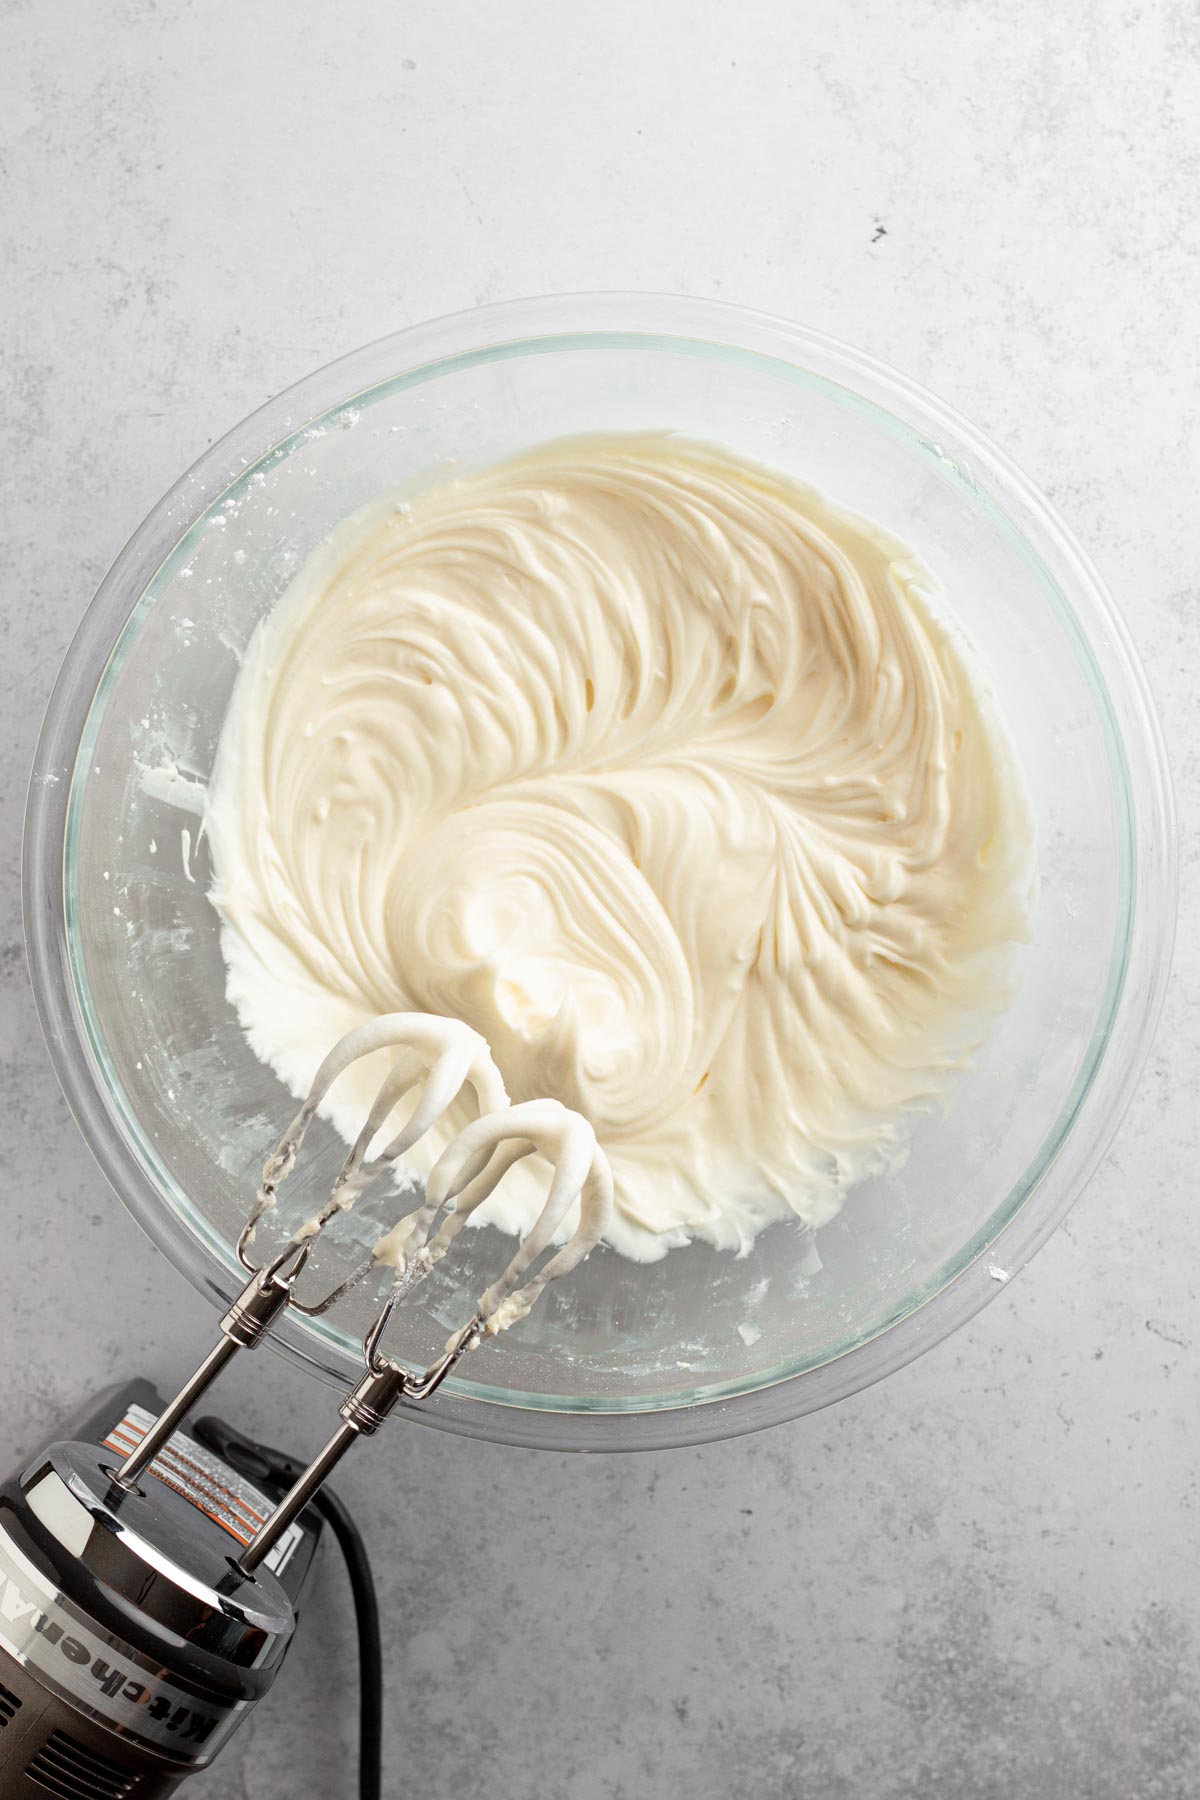 Cream cheese frosting in a glass bowl with an electric hand mixer.